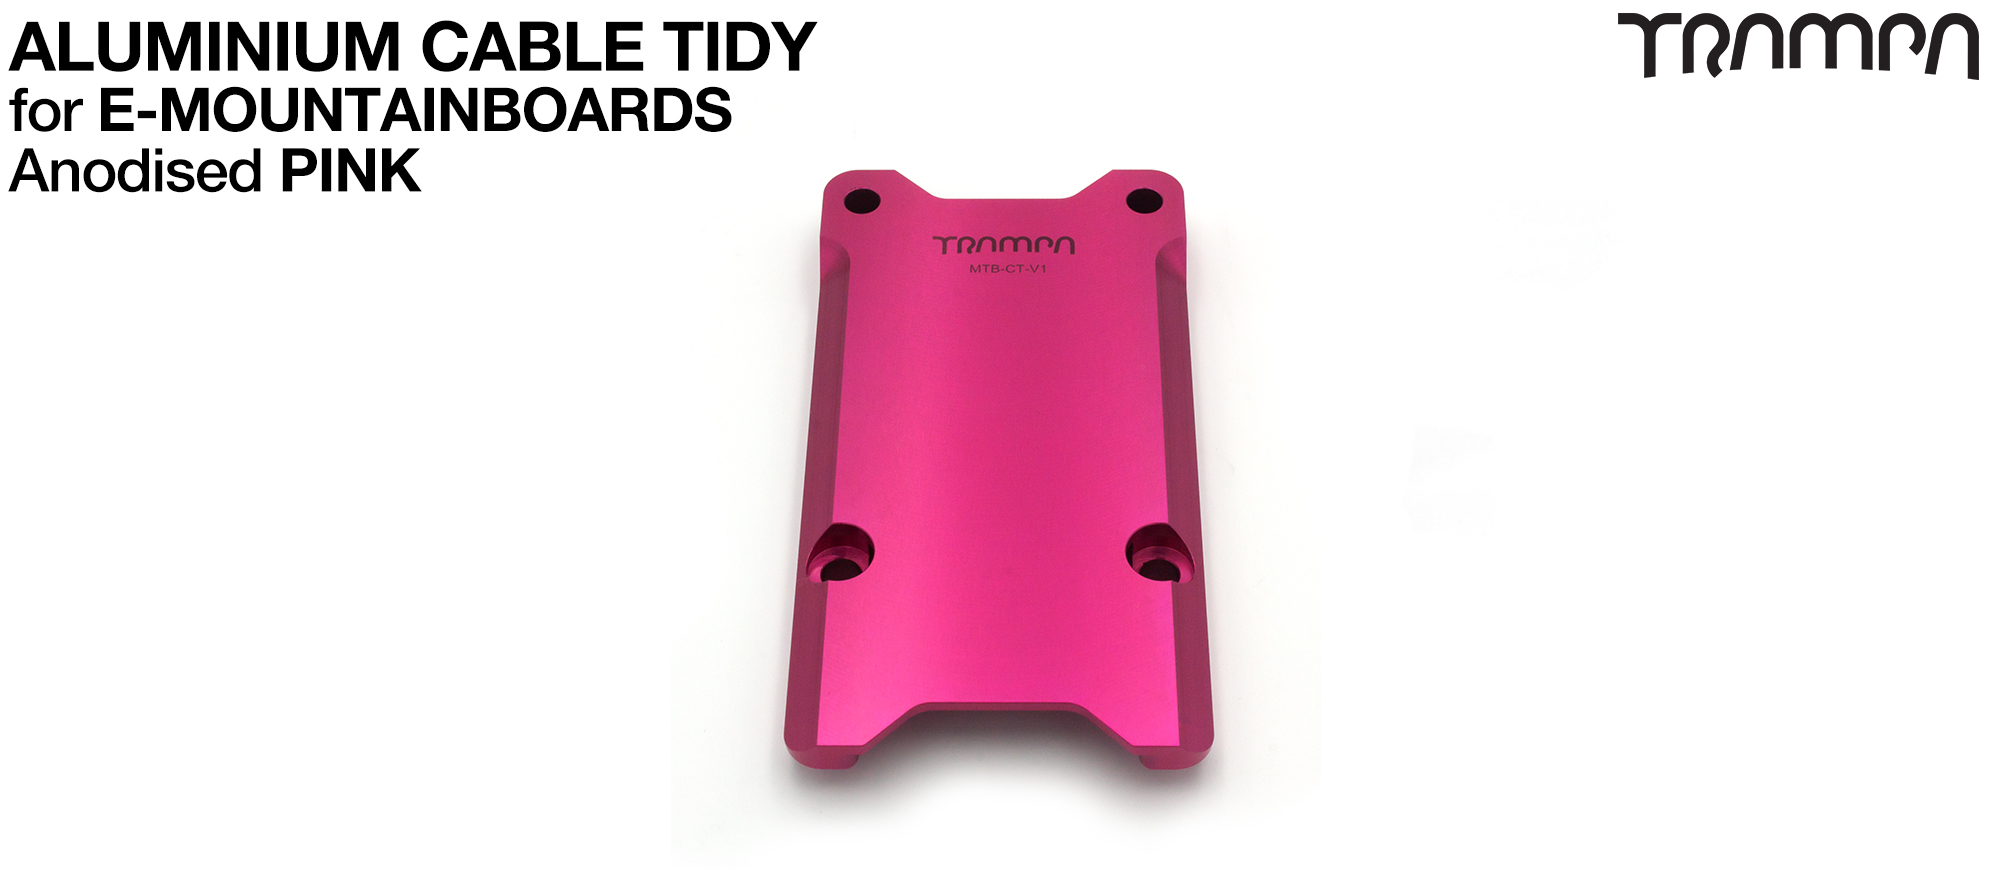 CABLE Router Anodised - PINK 